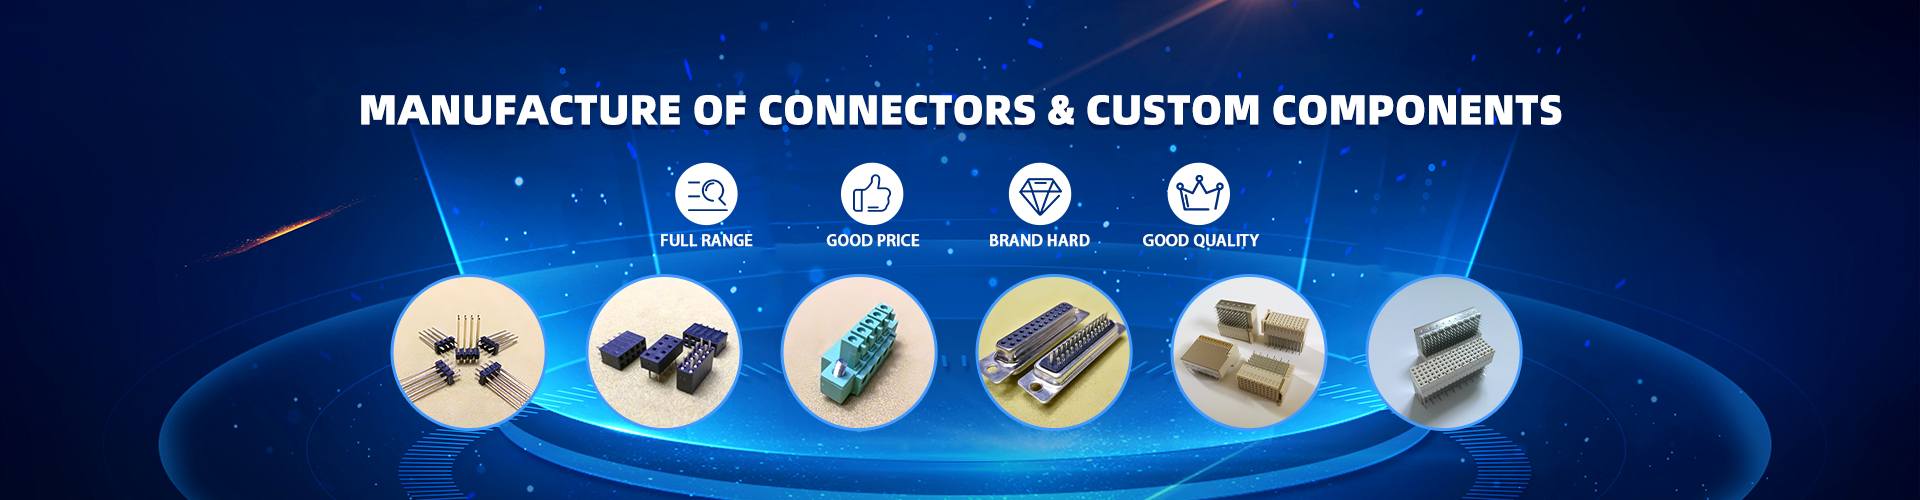 Manufacturer of Connectors and Custom Components